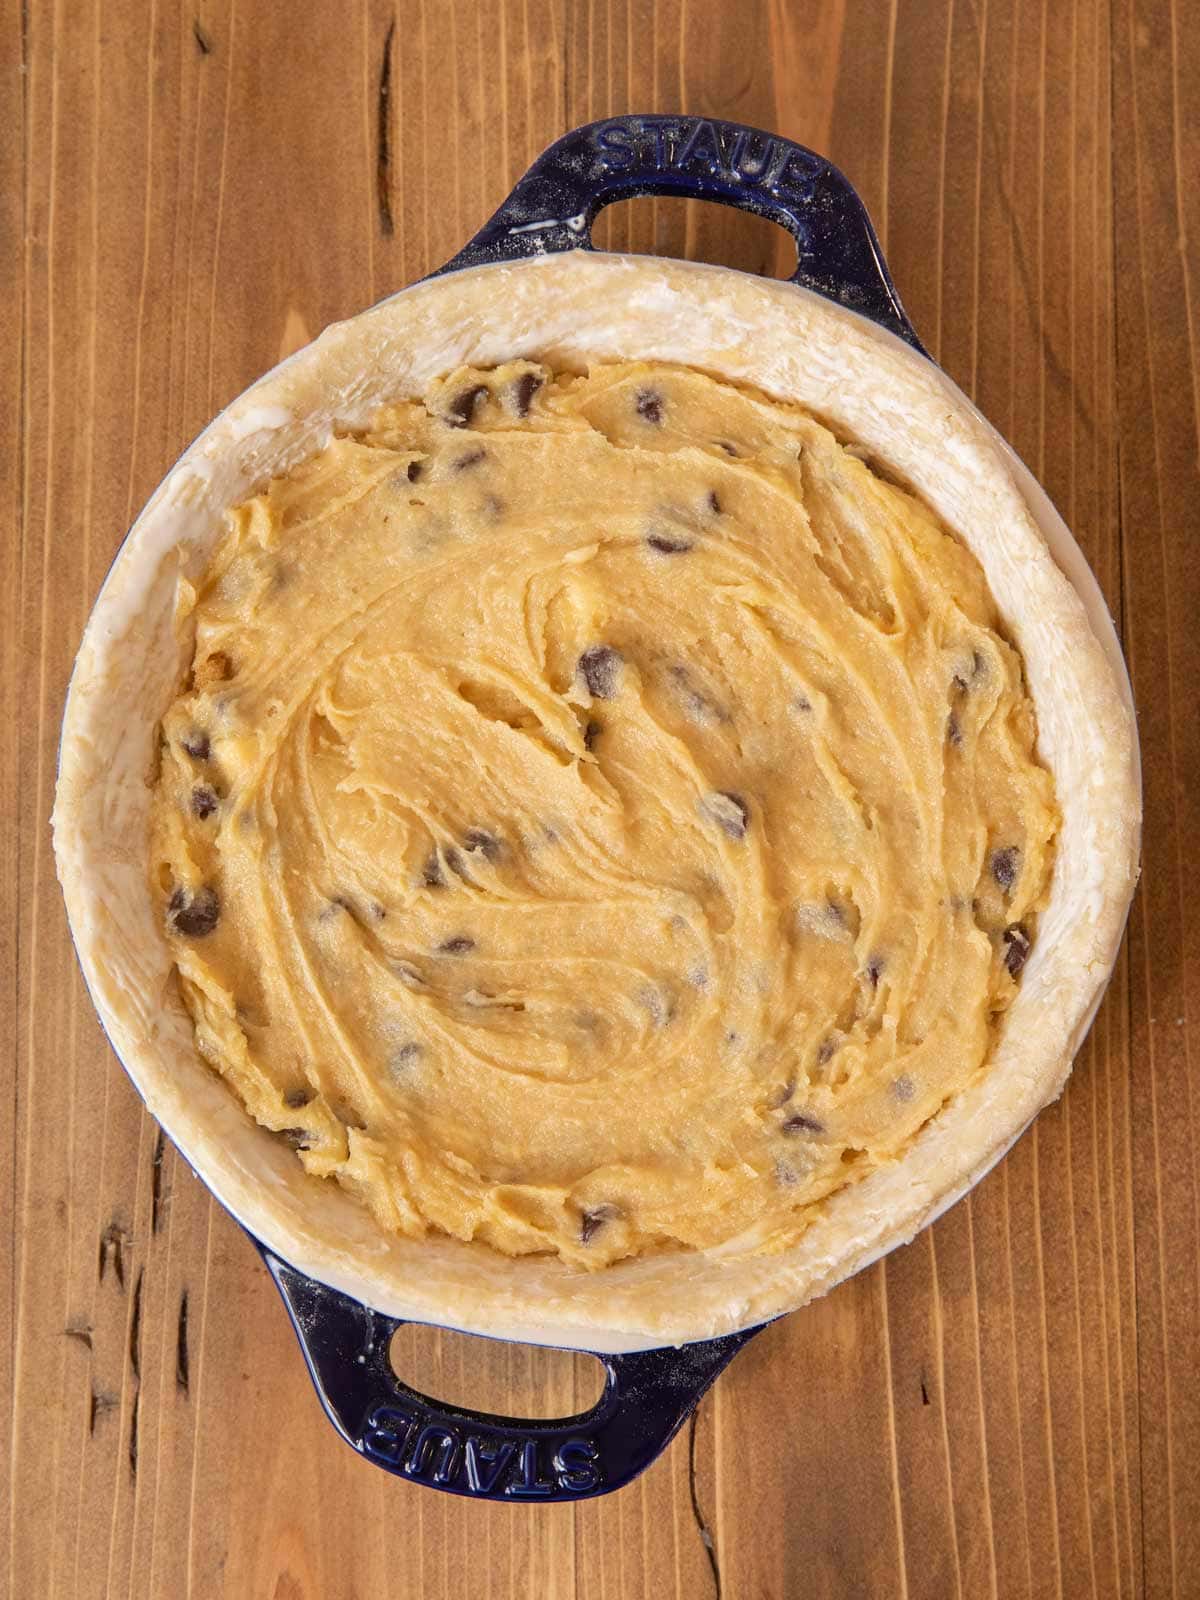 Chocolate Chip Cookie Pie unbaked pie in pie plate